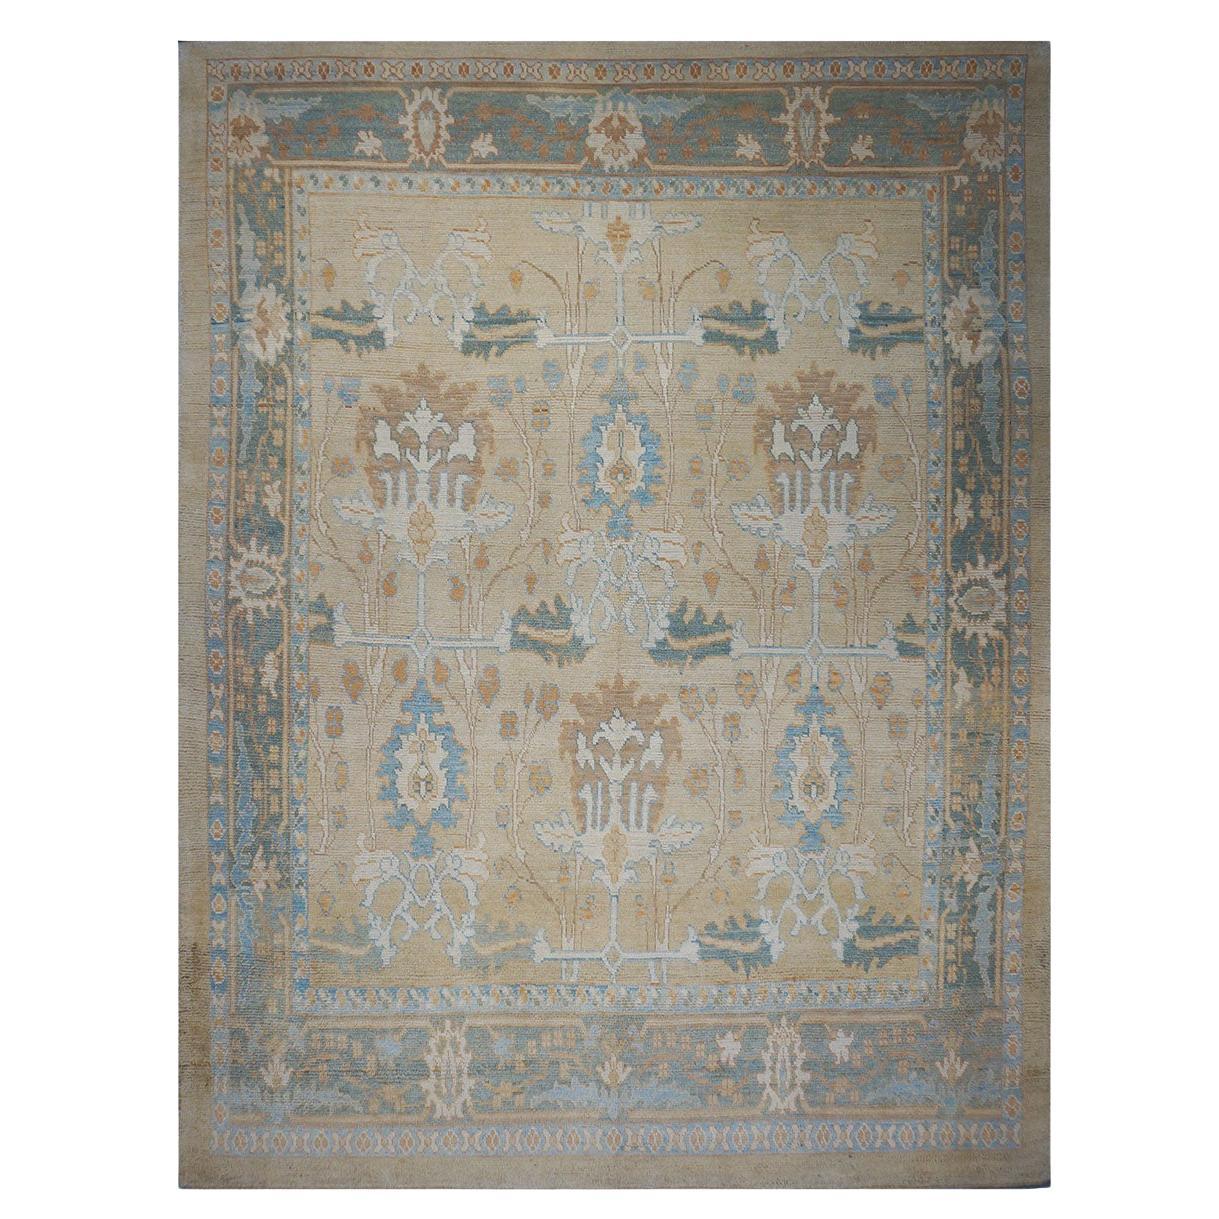 21st Century William Morris Donegal Carpet Ivory and Tan